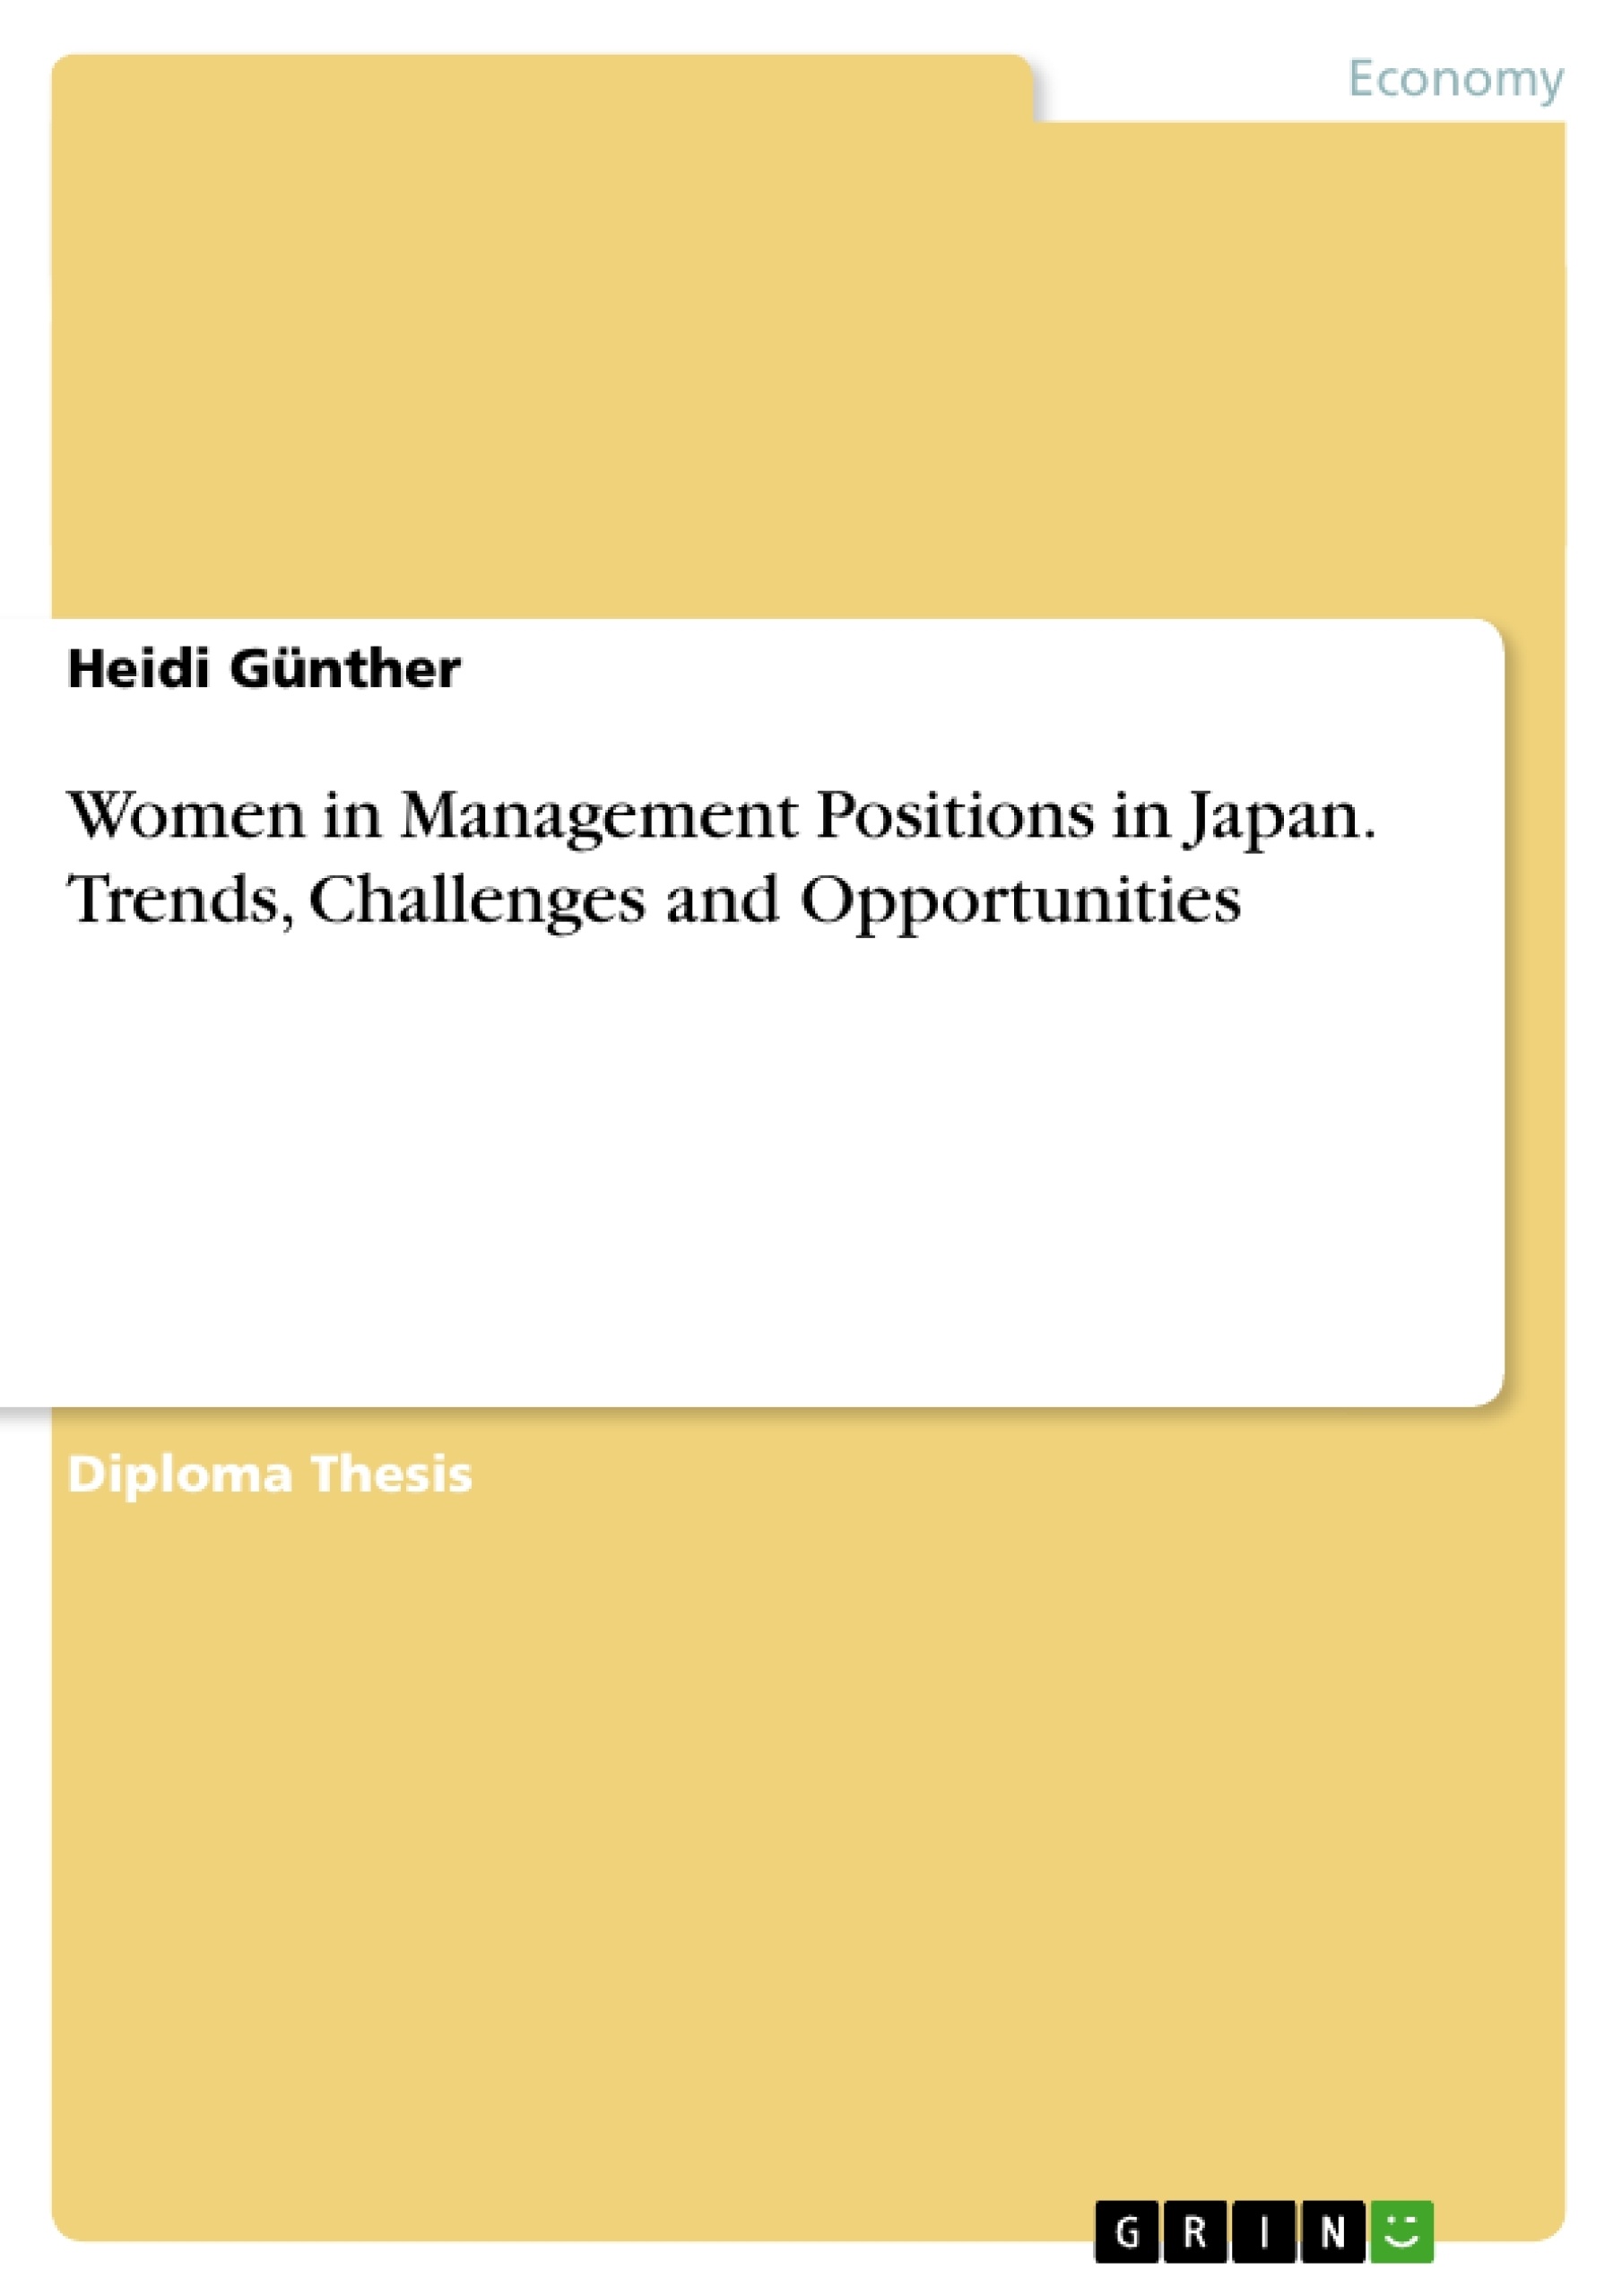 Title: Women in Management Positions in Japan. Trends, Challenges and Opportunities